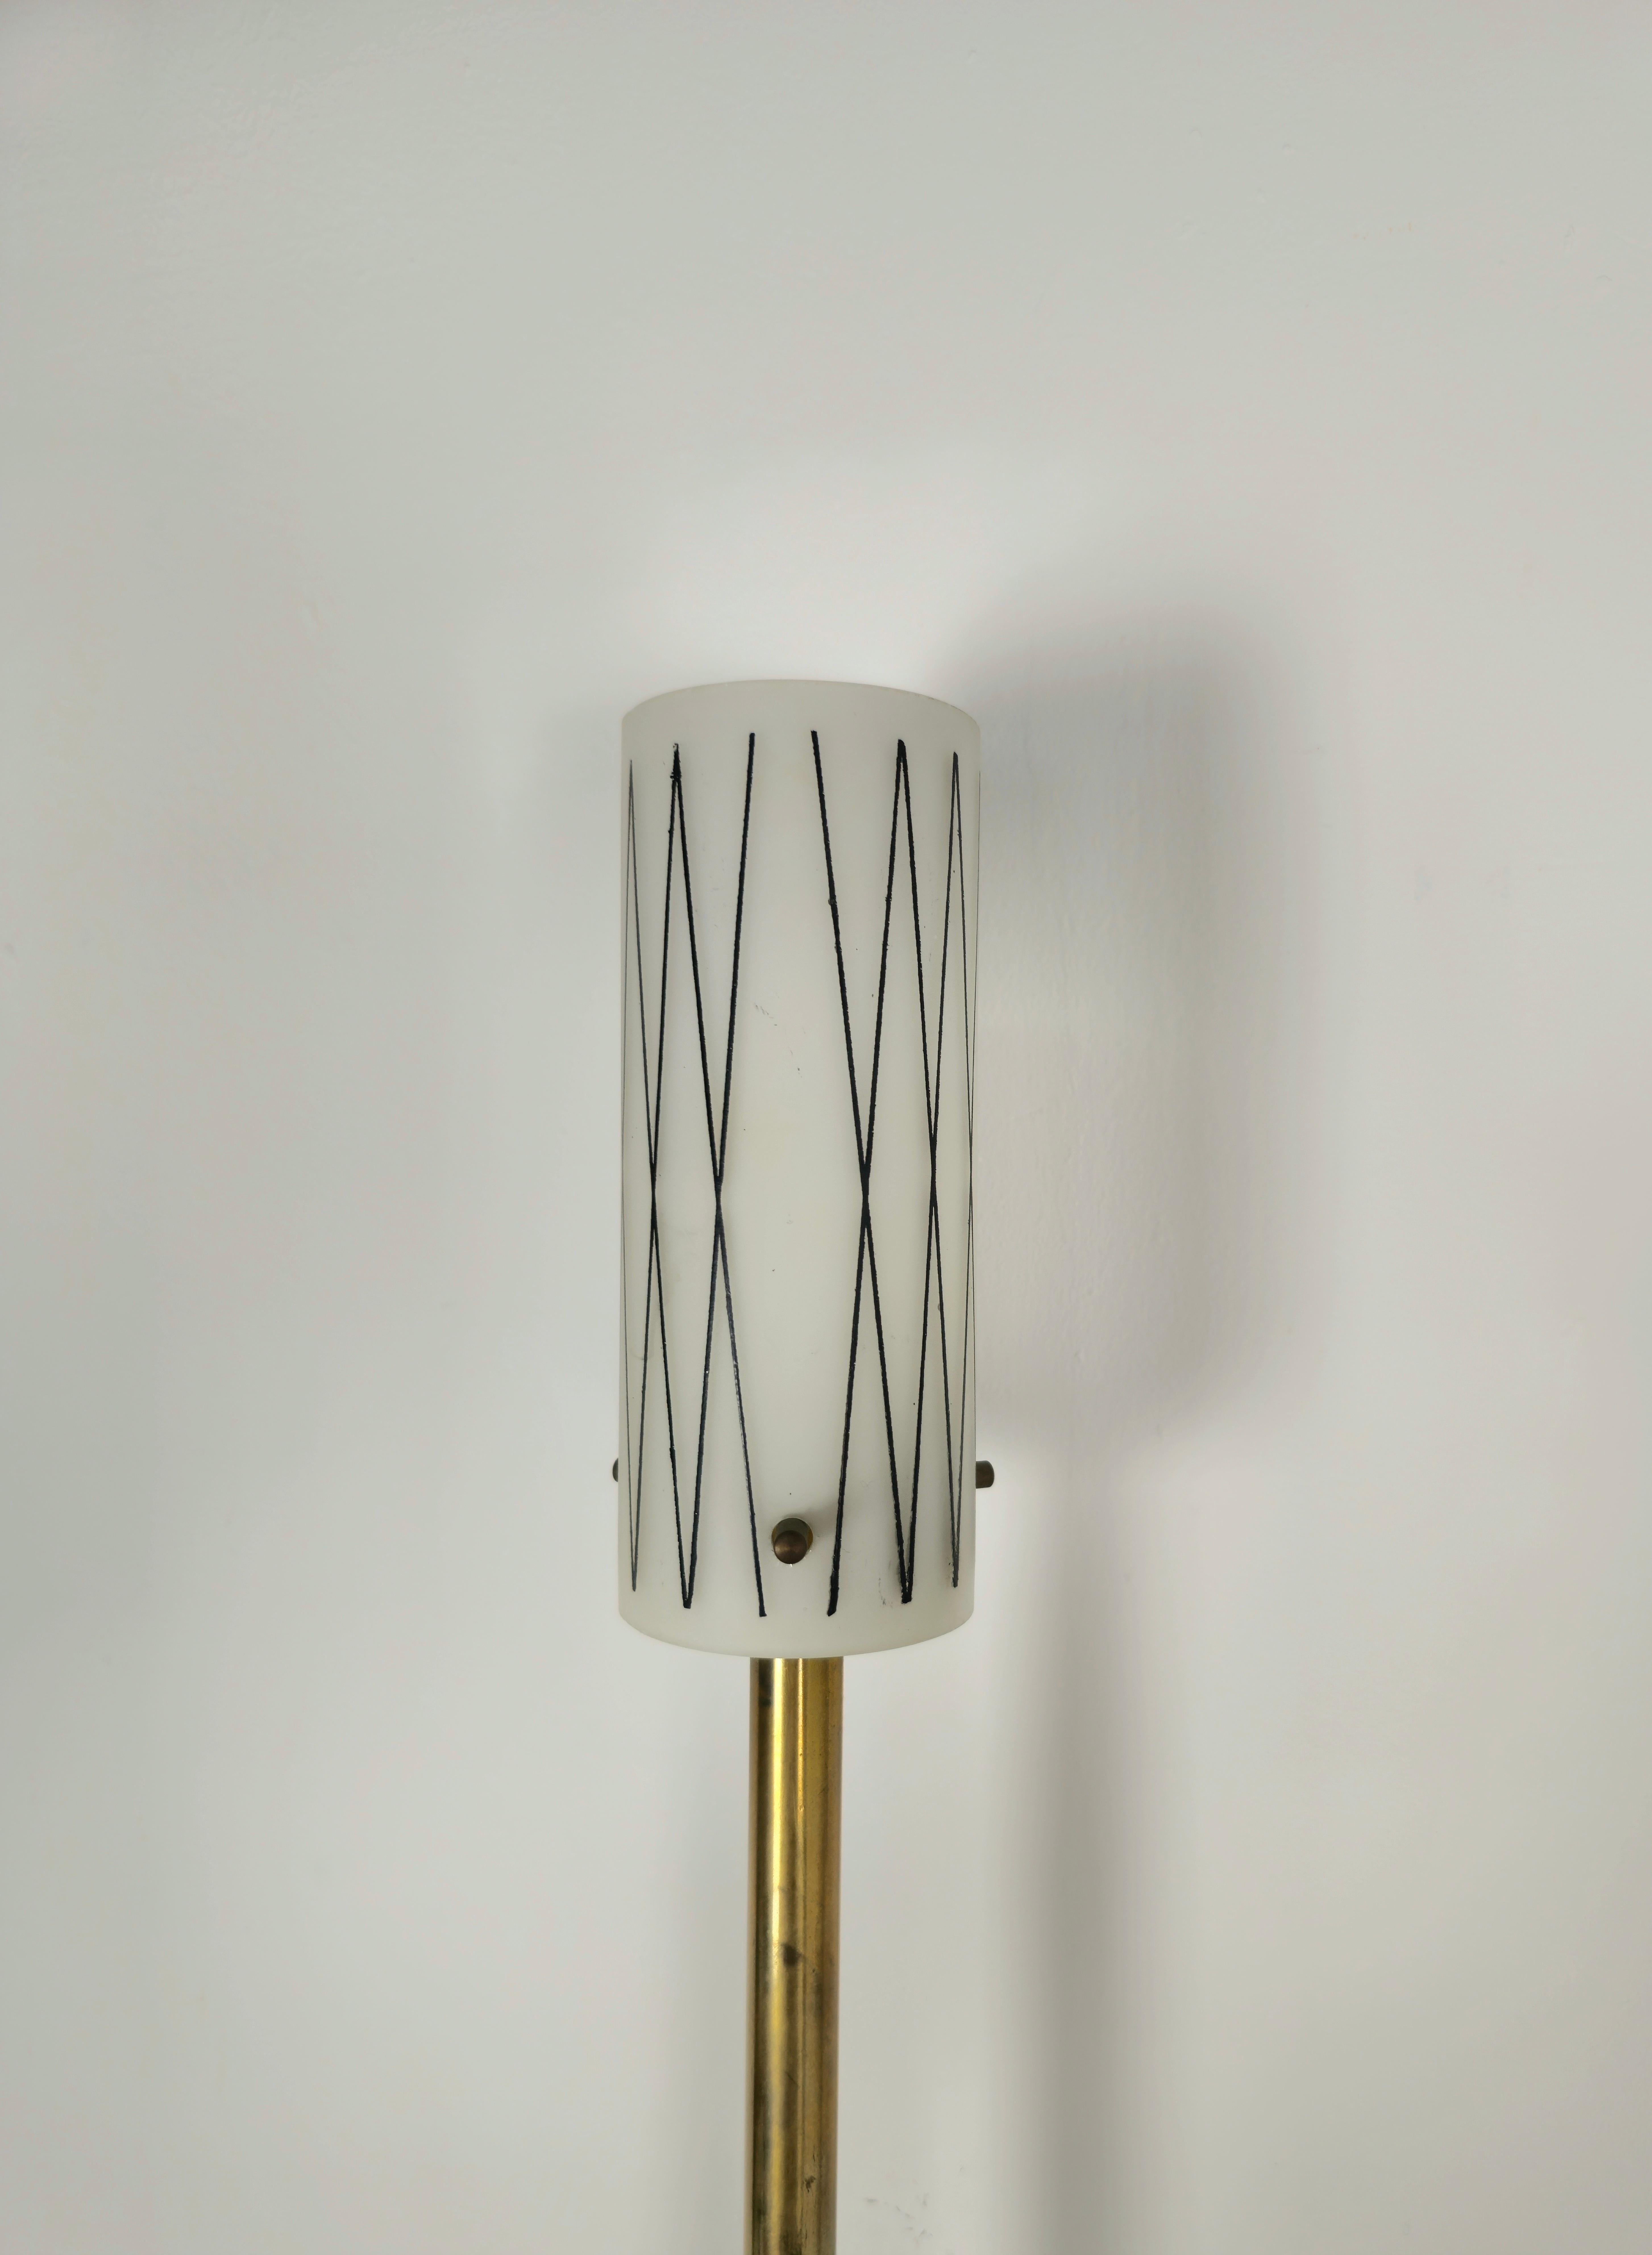 Pair of Wall Lights Sconces Brass Opaline Glass Midcentury Italian Design 1950s  For Sale 3